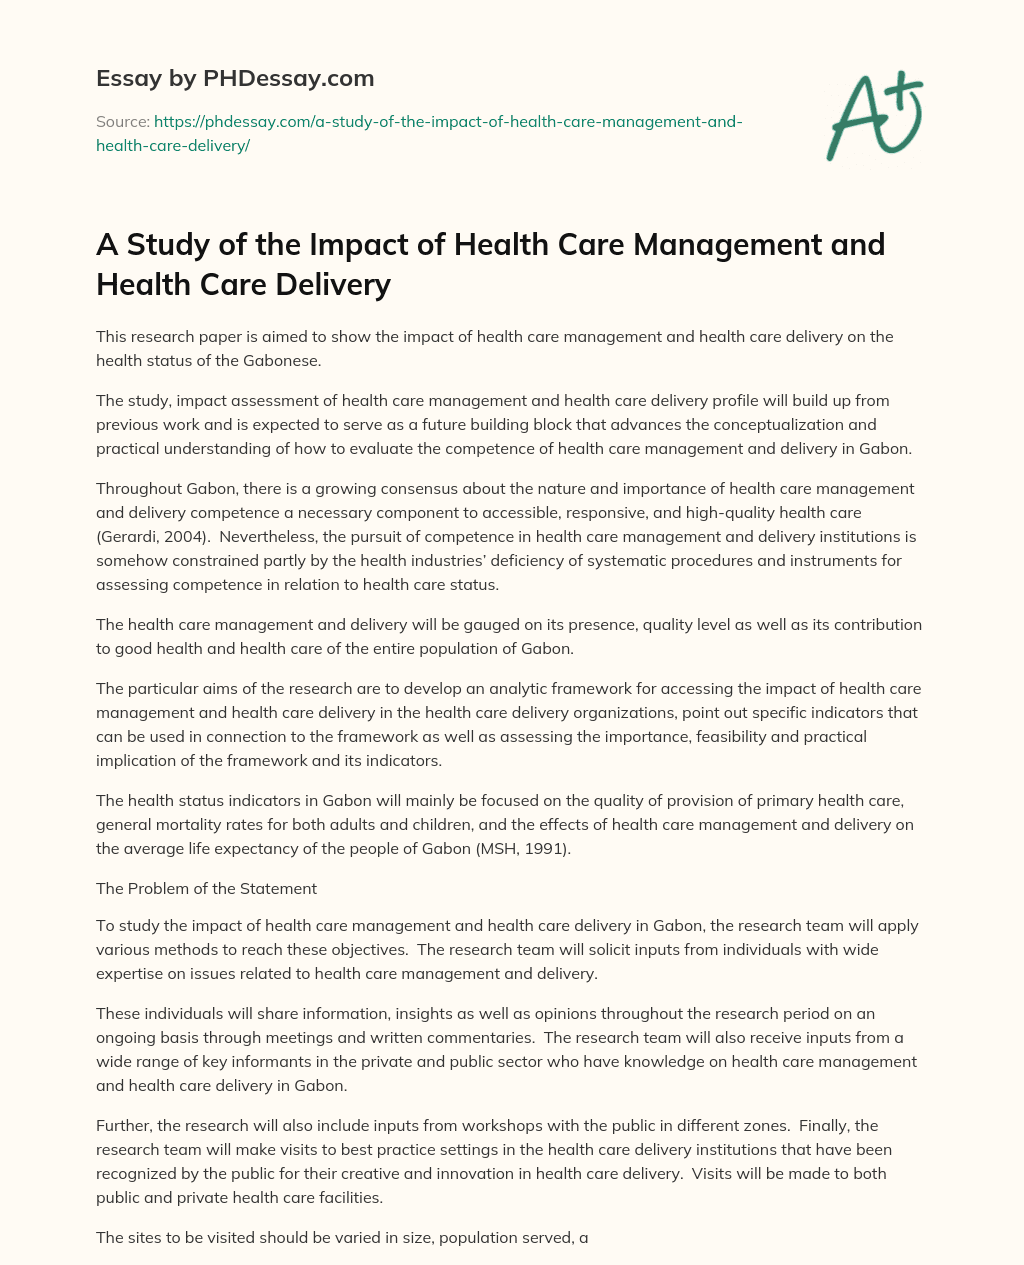 A Study of the Impact of Health Care Management and Health Care Delivery essay